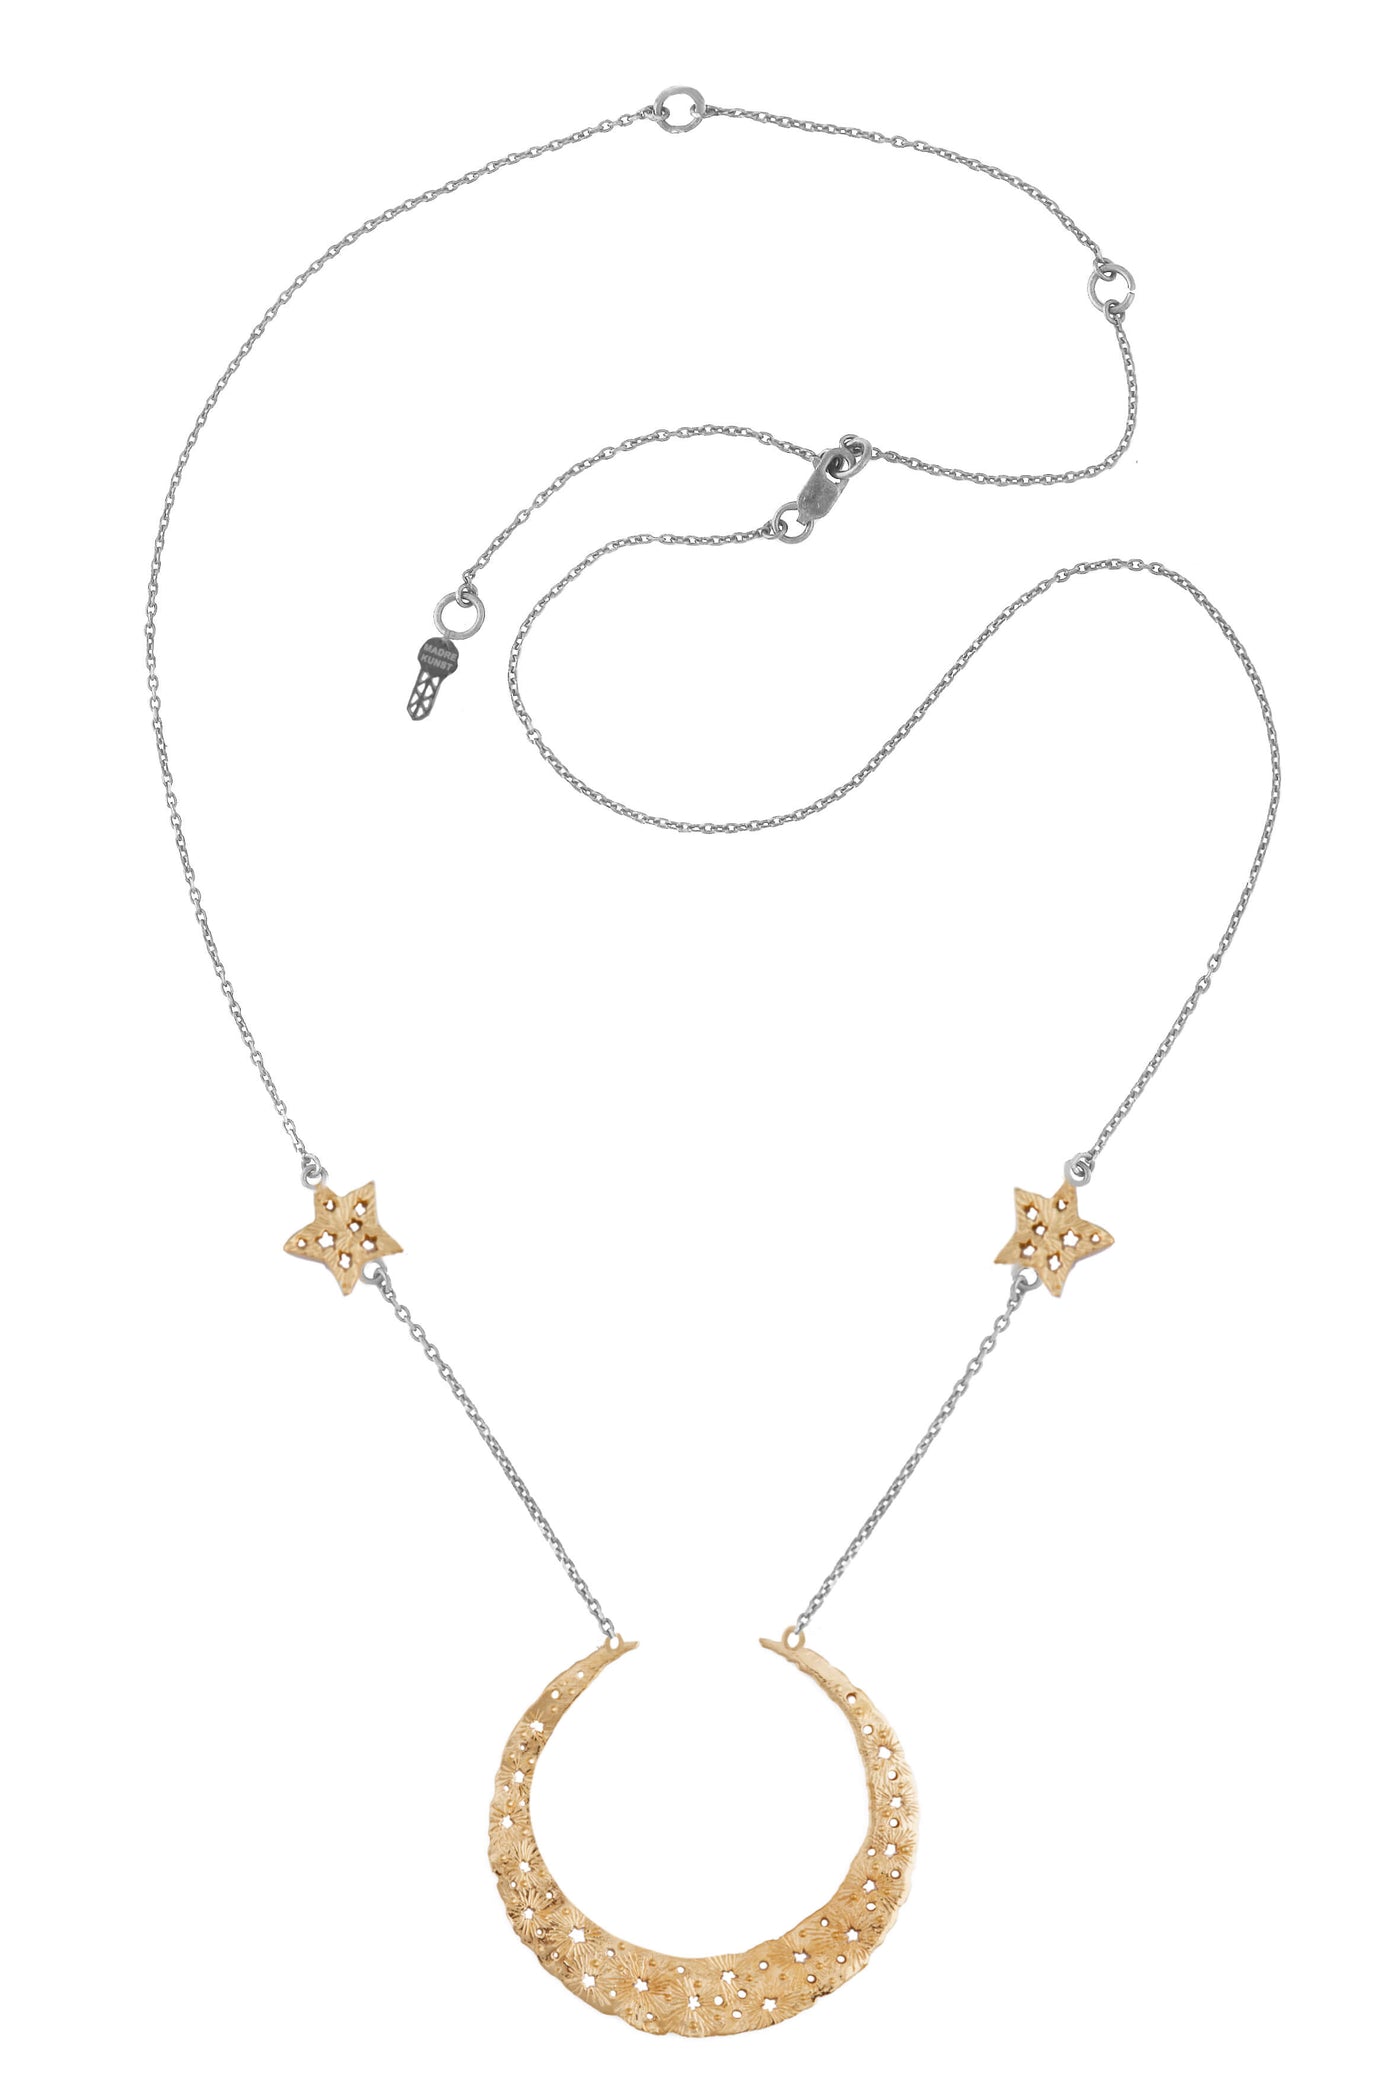 Moon Queen with 2 stars on the chain necklace. Silver, partly gold-plated